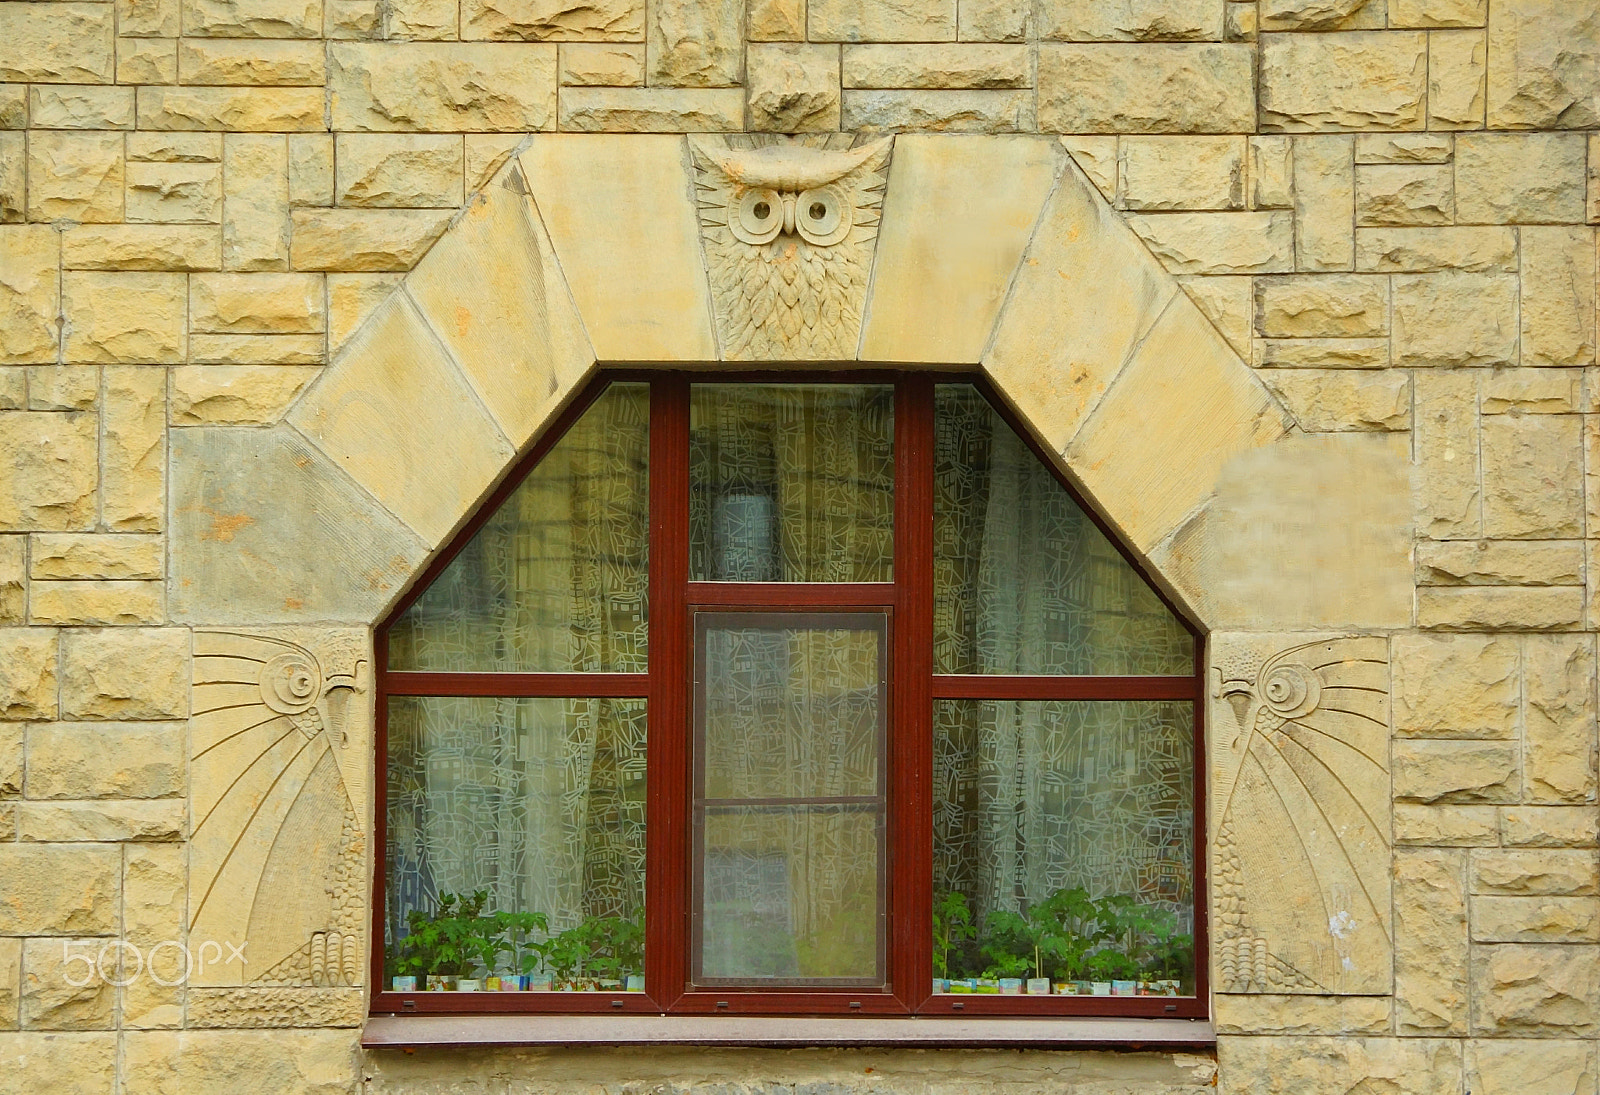 Sony SLT-A77 + Tamron AF 28-105mm F4-5.6 [IF] sample photo. Fragment of the facade of a house with a window and an owl in the art nouveau style photography